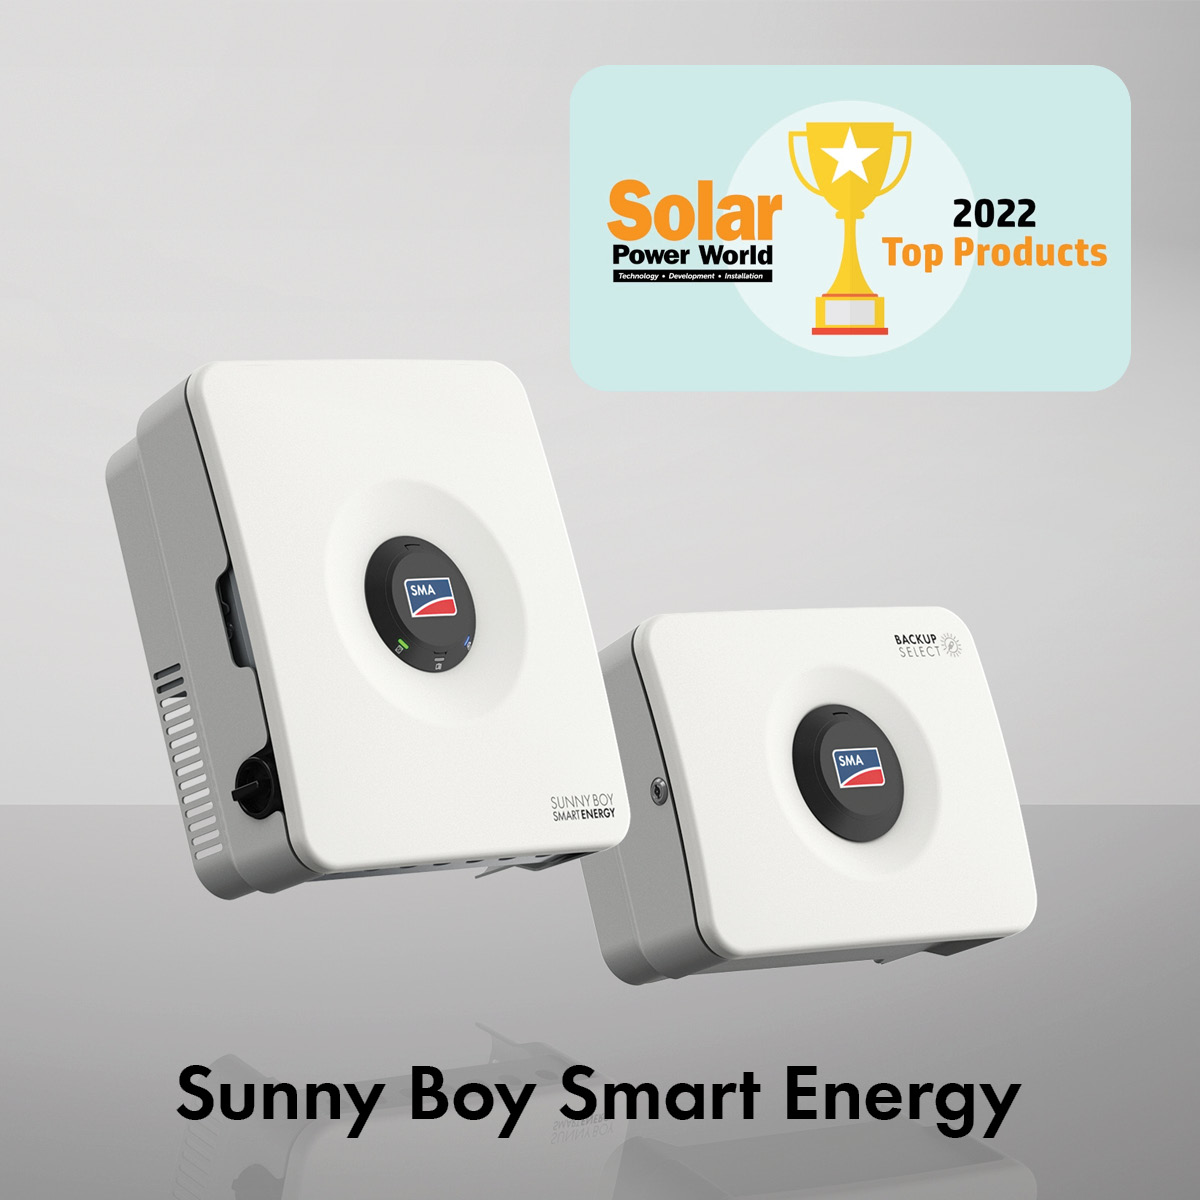 SMA named to the Top Products list by Solar Power World